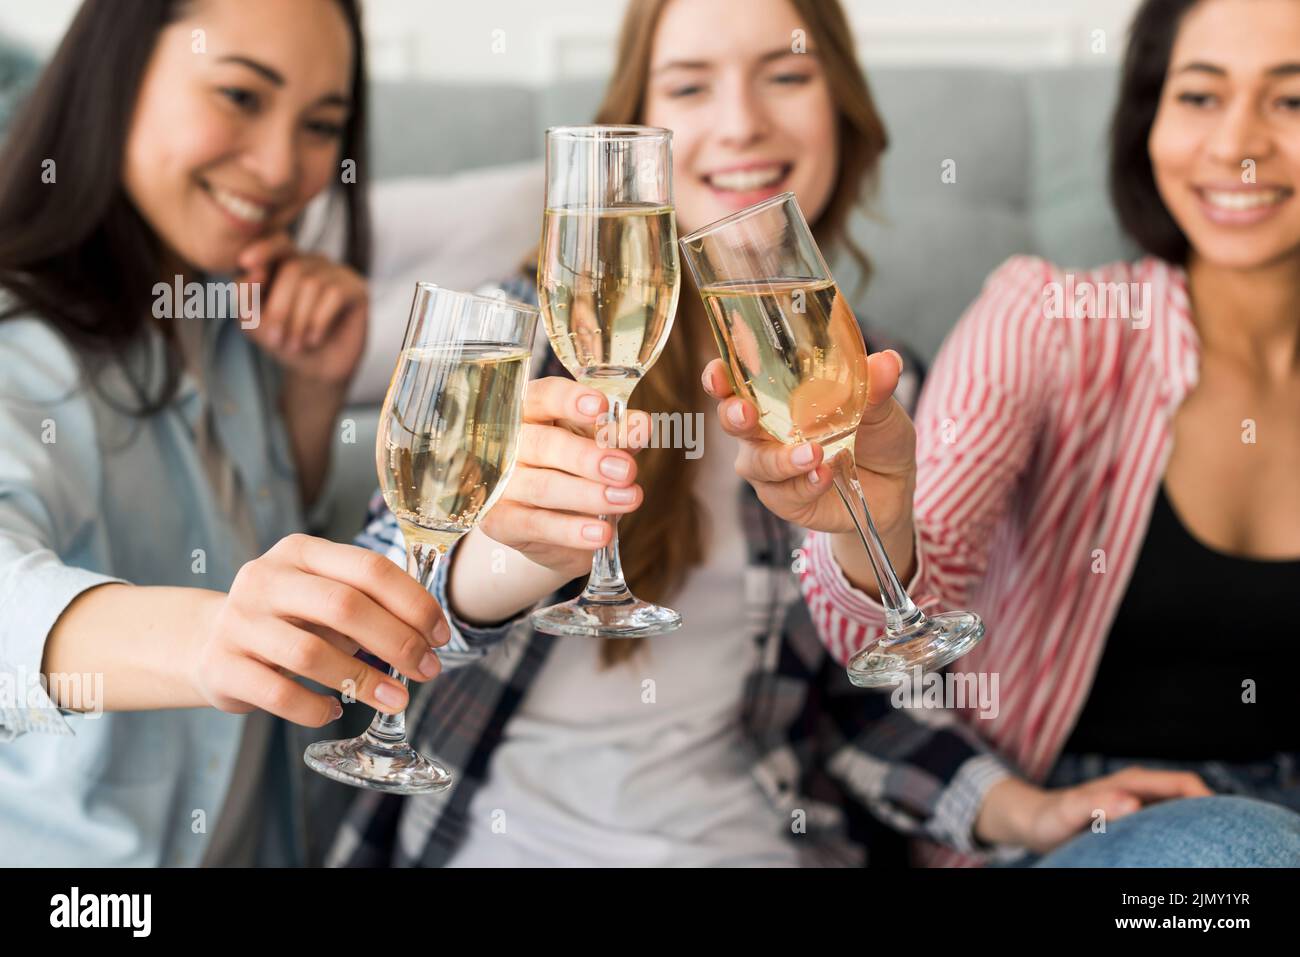 Smiling sitting girls holding glasses clinking it together Stock Photo